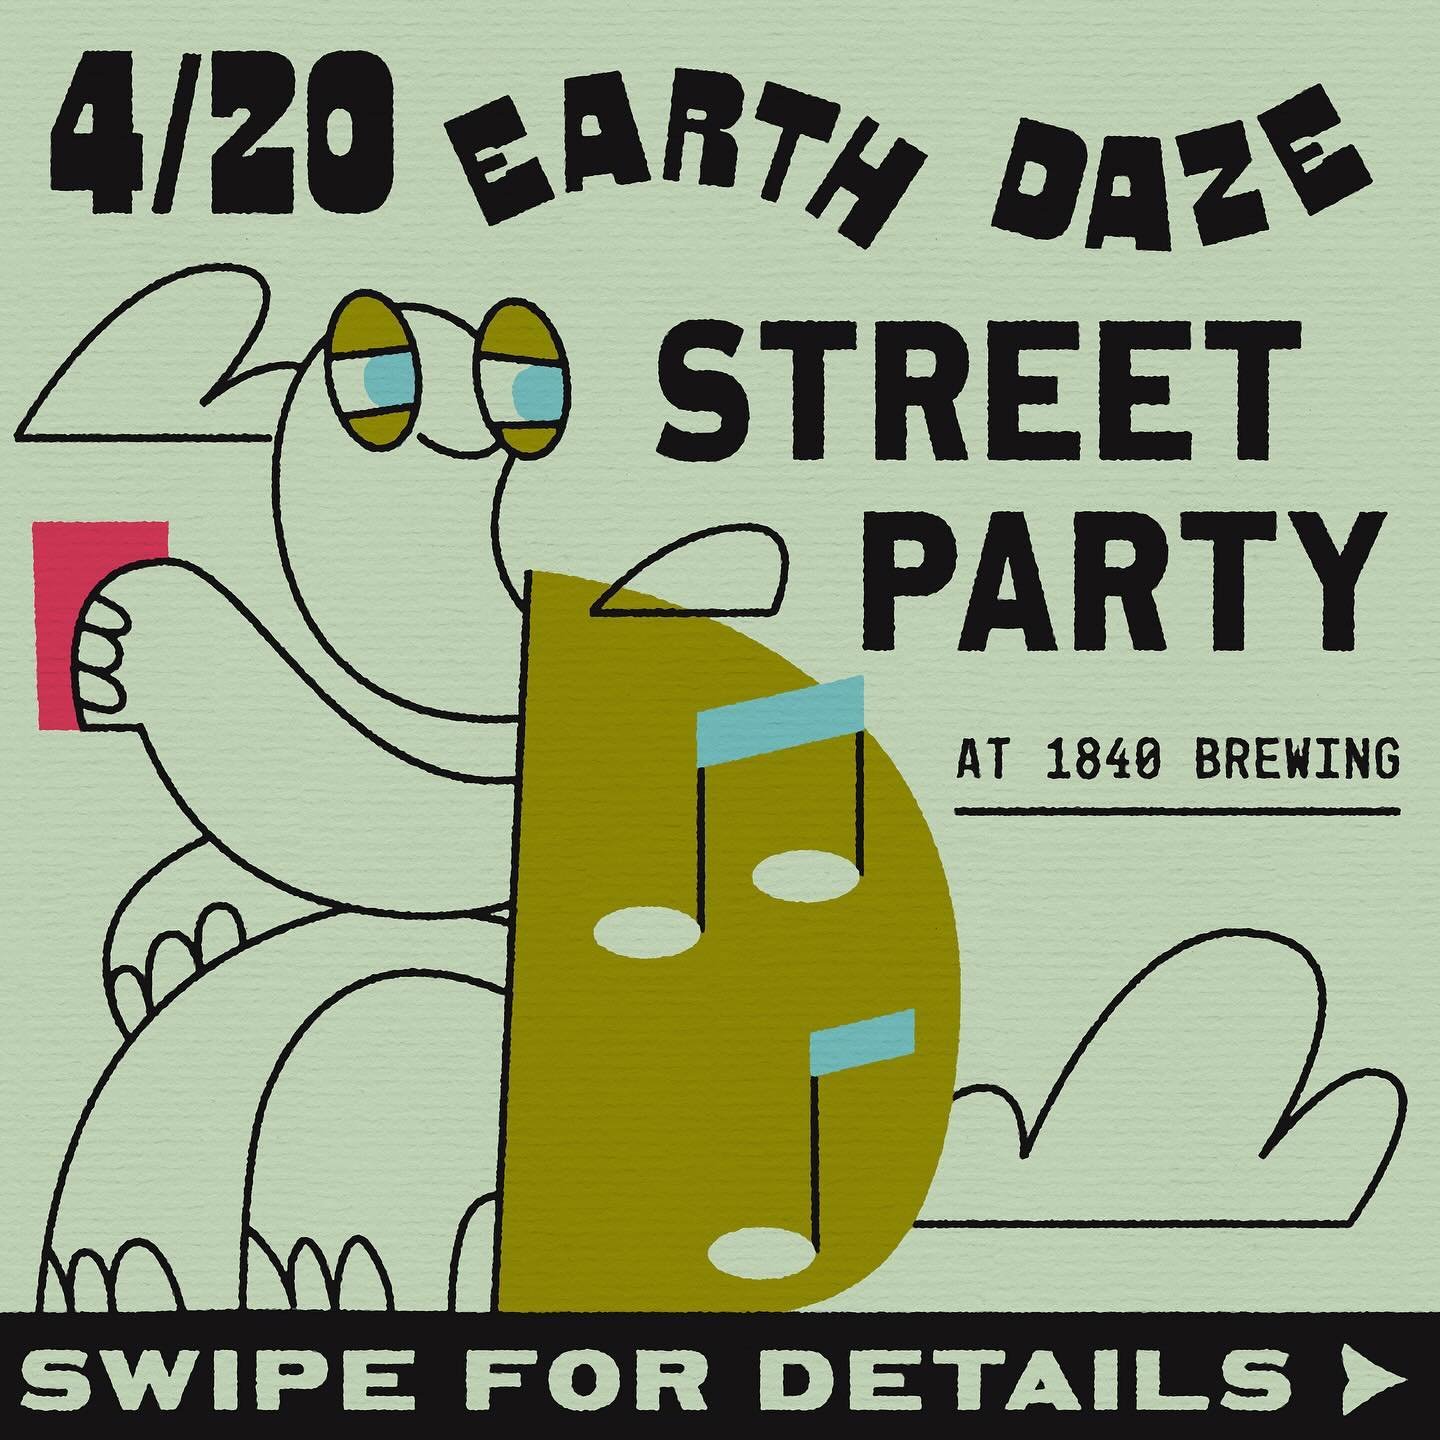 The EARTH DAZE street party is 4/20!!
Join us for our annual Spring street party, now part of our newly minted Earth Daze weekend!

SNAG two new beers including our annual @eagleparkbrewing collab, Joint IPA. Celebrating 7 years of rolling joints wit